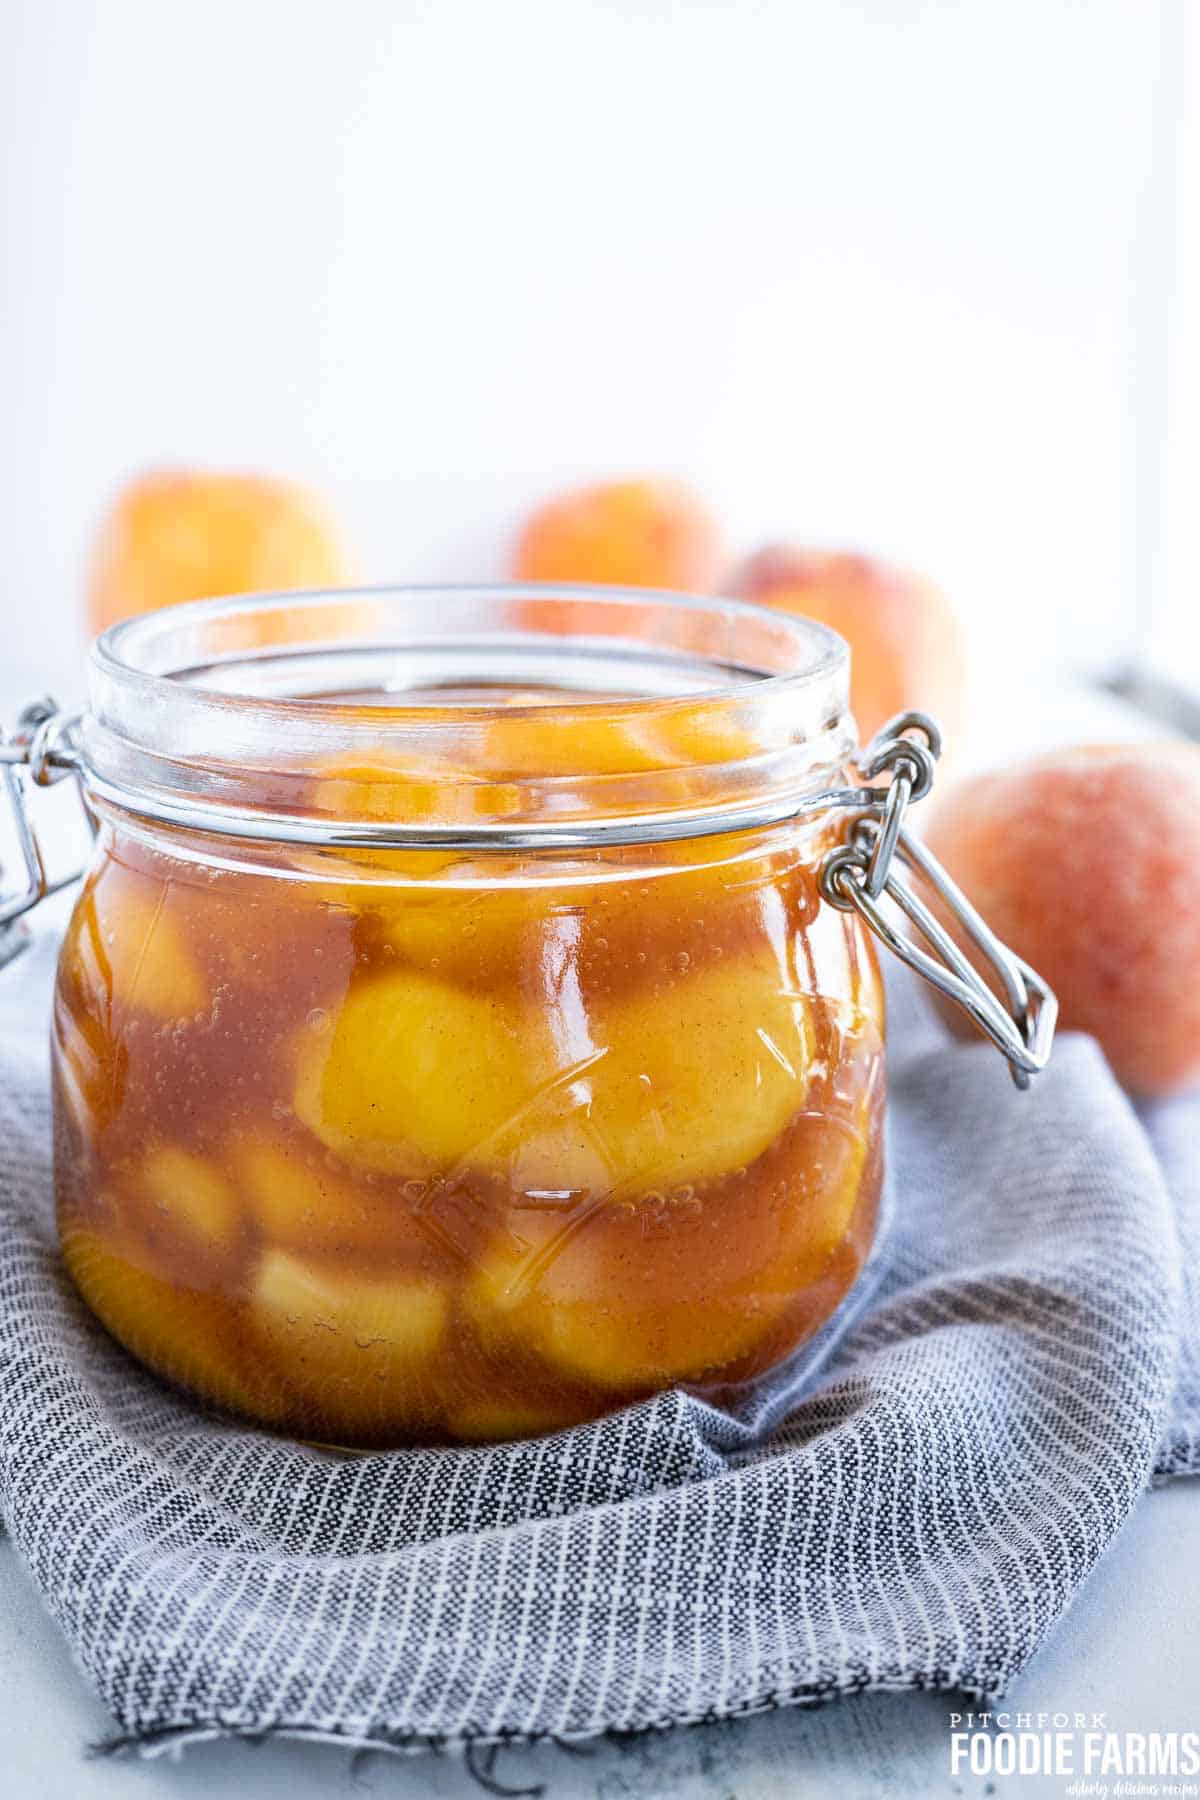 Peach pie filling in a jar sitting on a blue and white napkin.